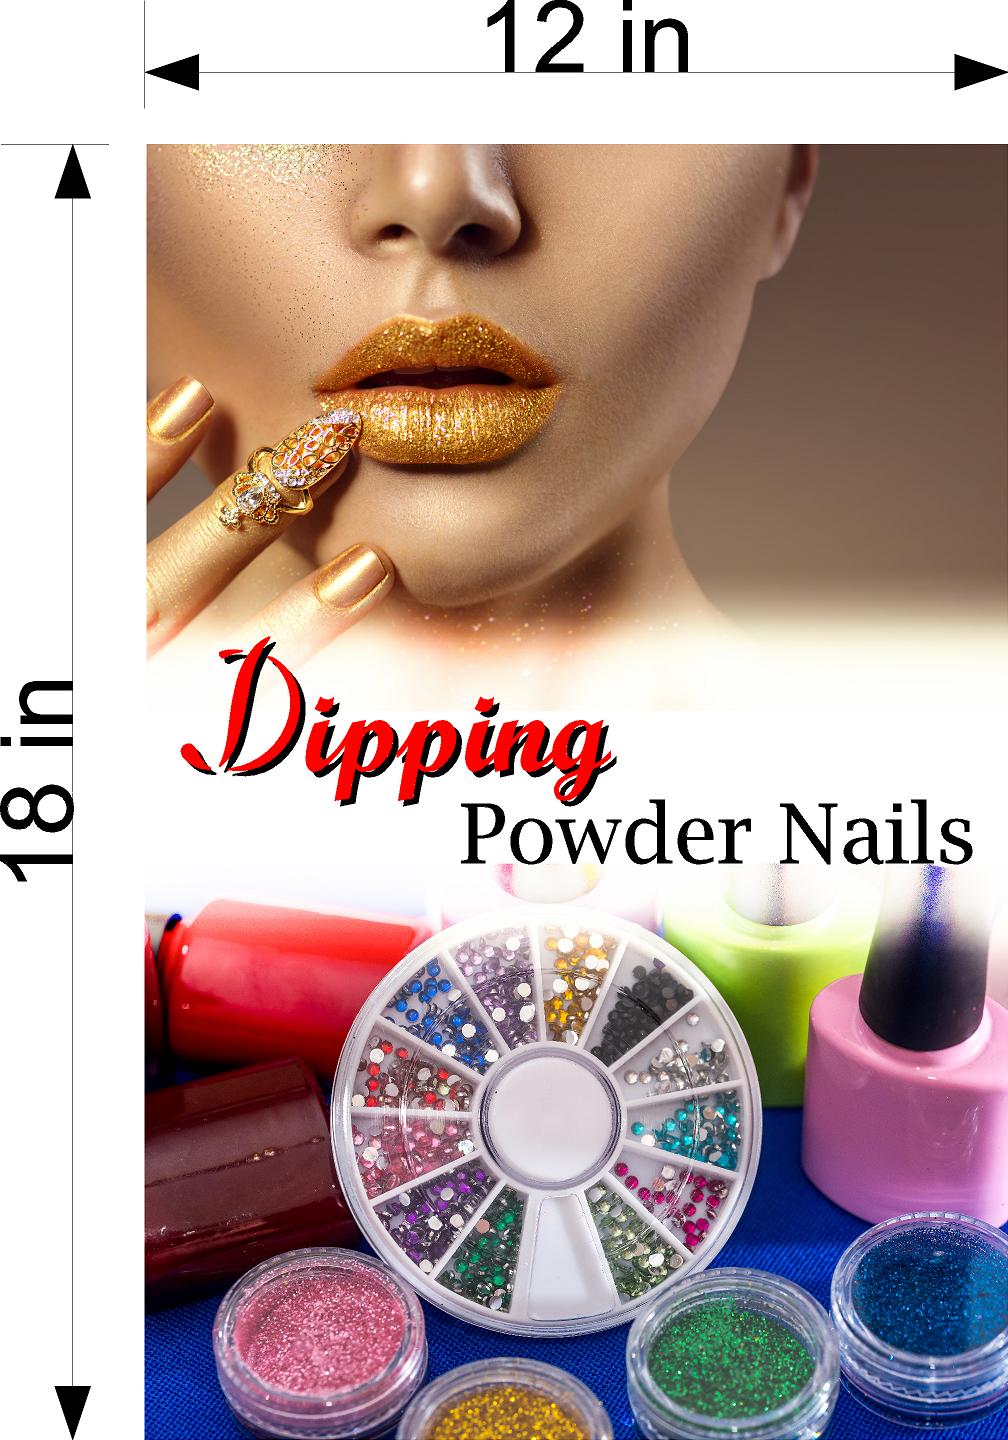 Dipping Powder 01 Wallpaper Poster Decal with Adhesive Backing Wall Sticker Decor Nail Salon Sign Vertical